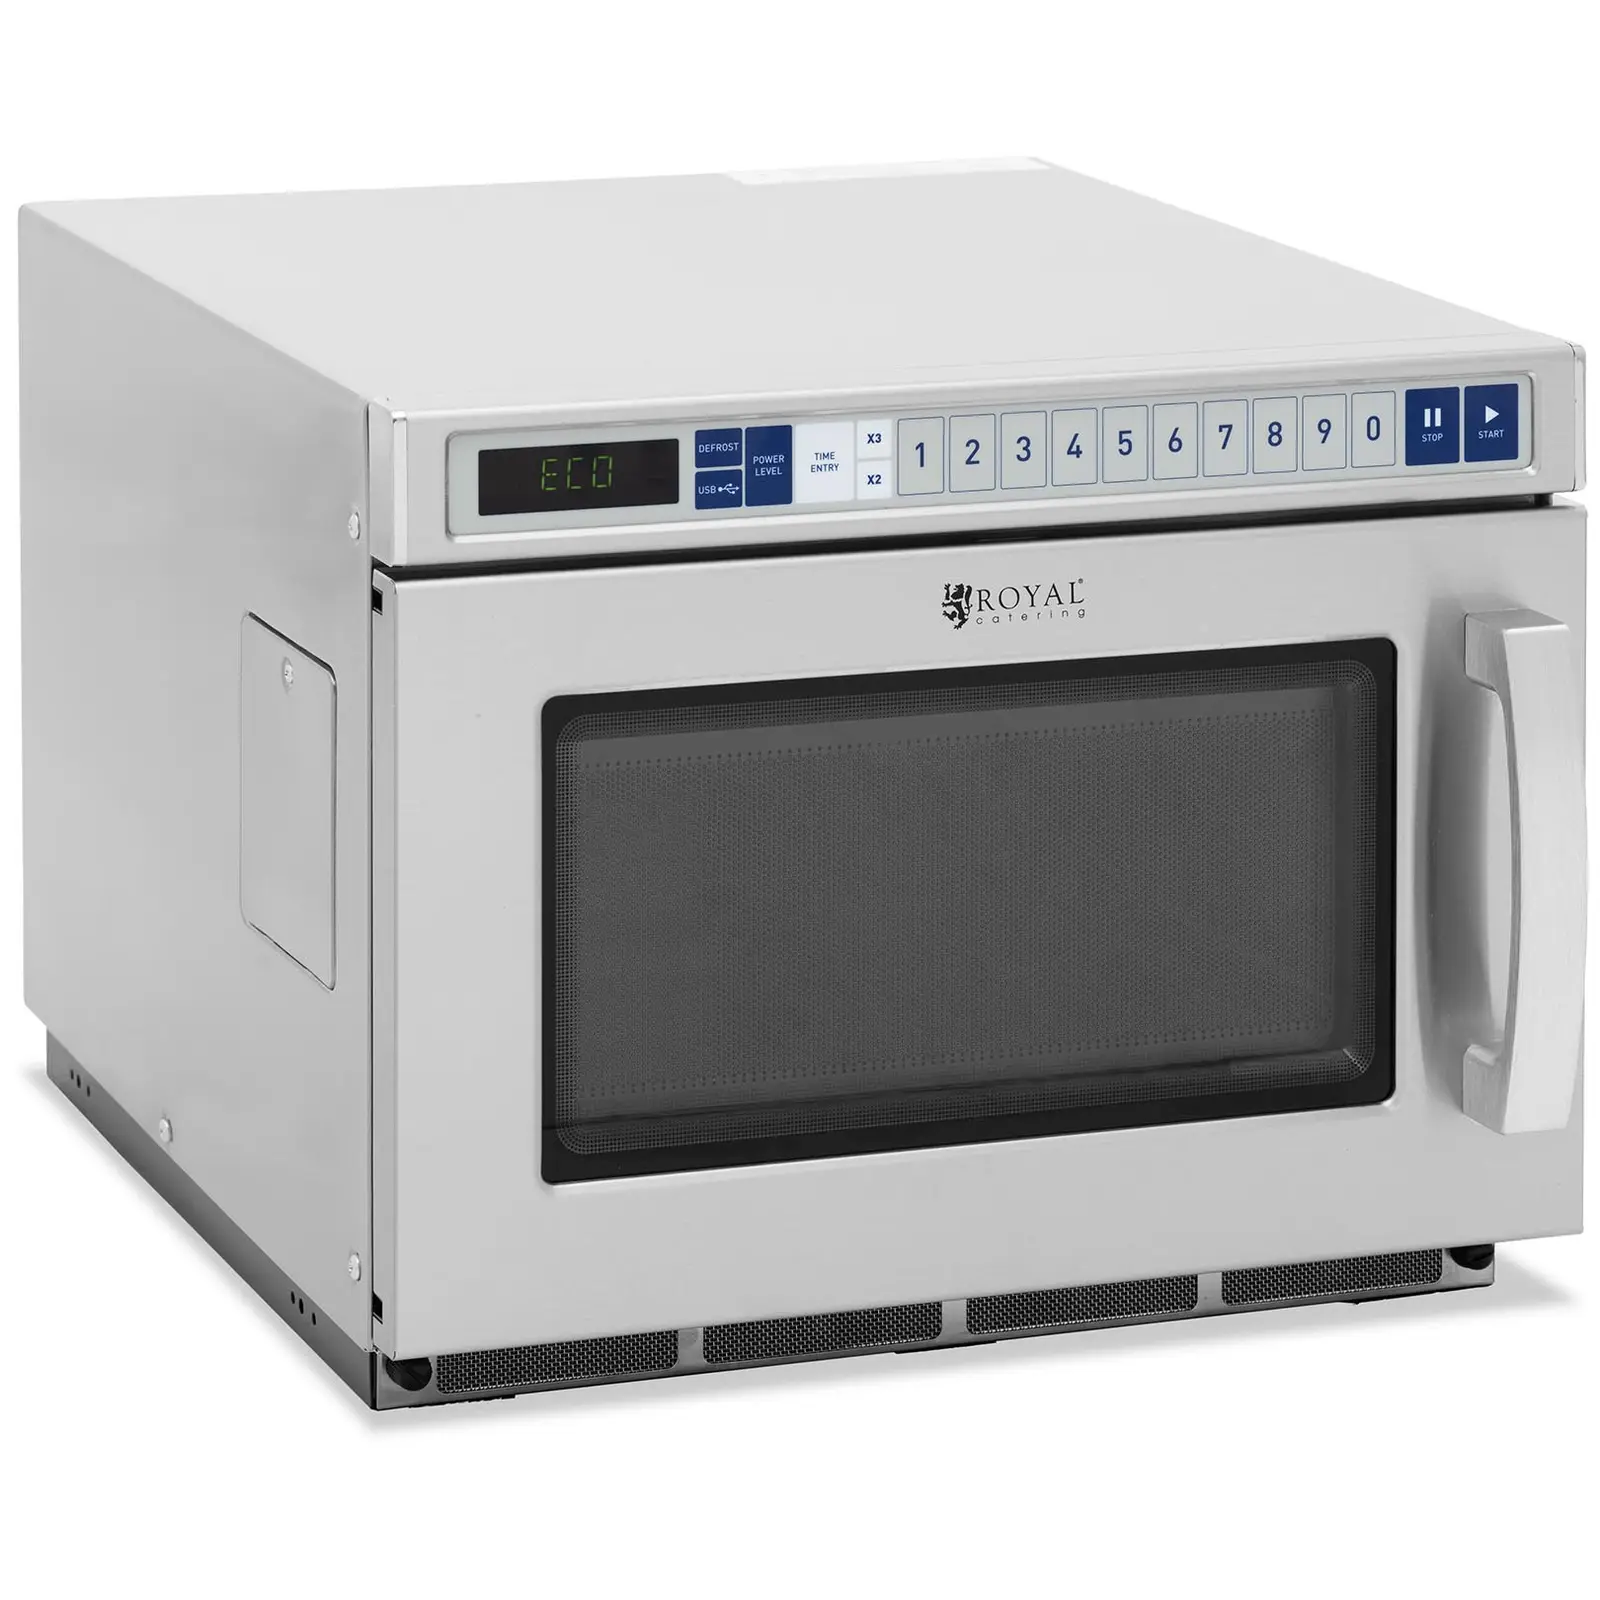 Microwave - 3000 W - 17 L - Royal Catering